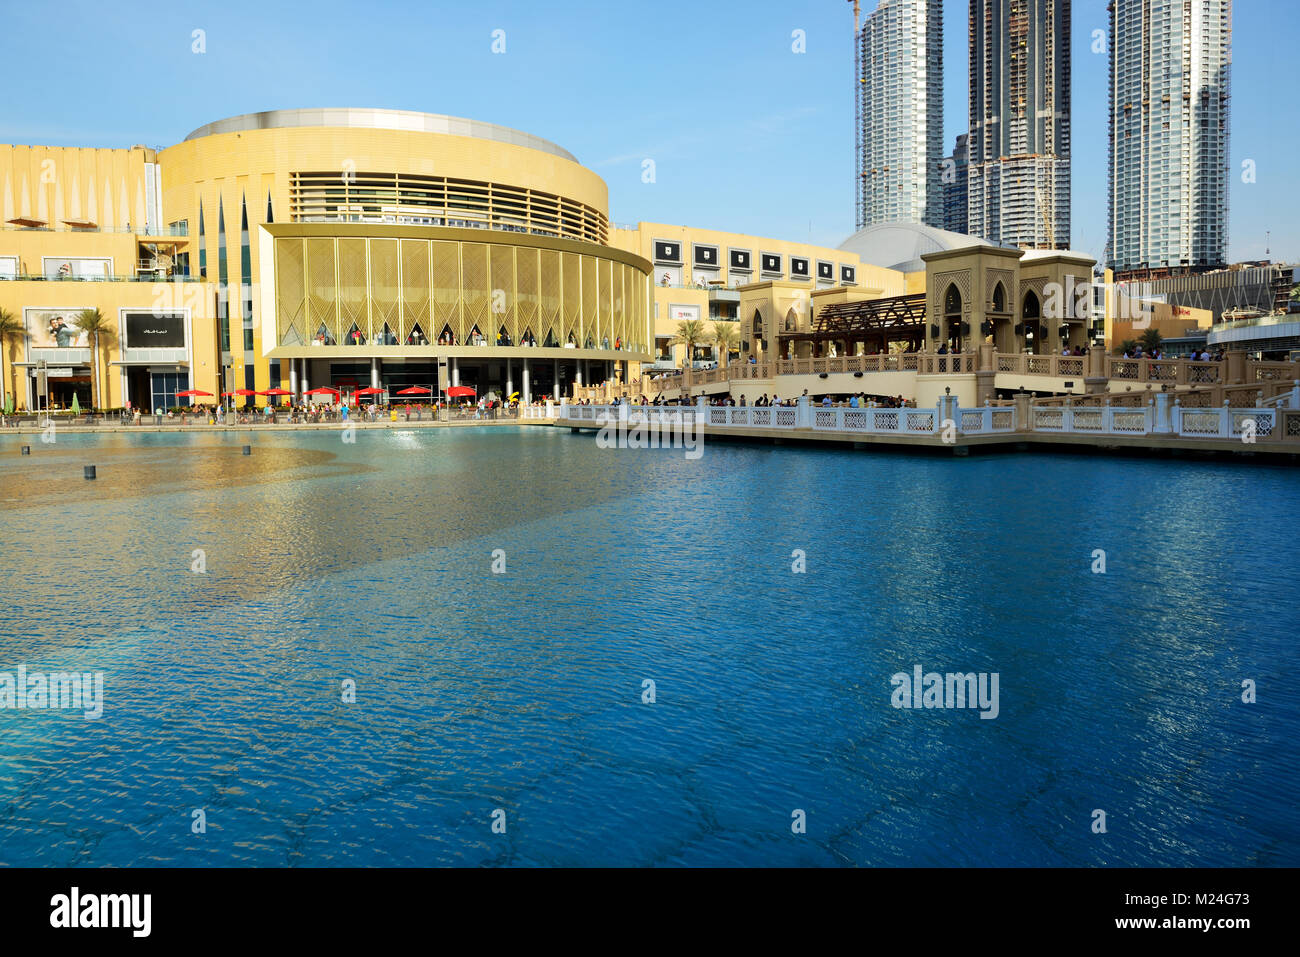 DUBAI, UAE - NOVEMBER 19: The Dubai Mall is the world's largest shopping mall.  It is located in Burj Khalifa complex and has 1200 shops inside on Nov Stock Photo